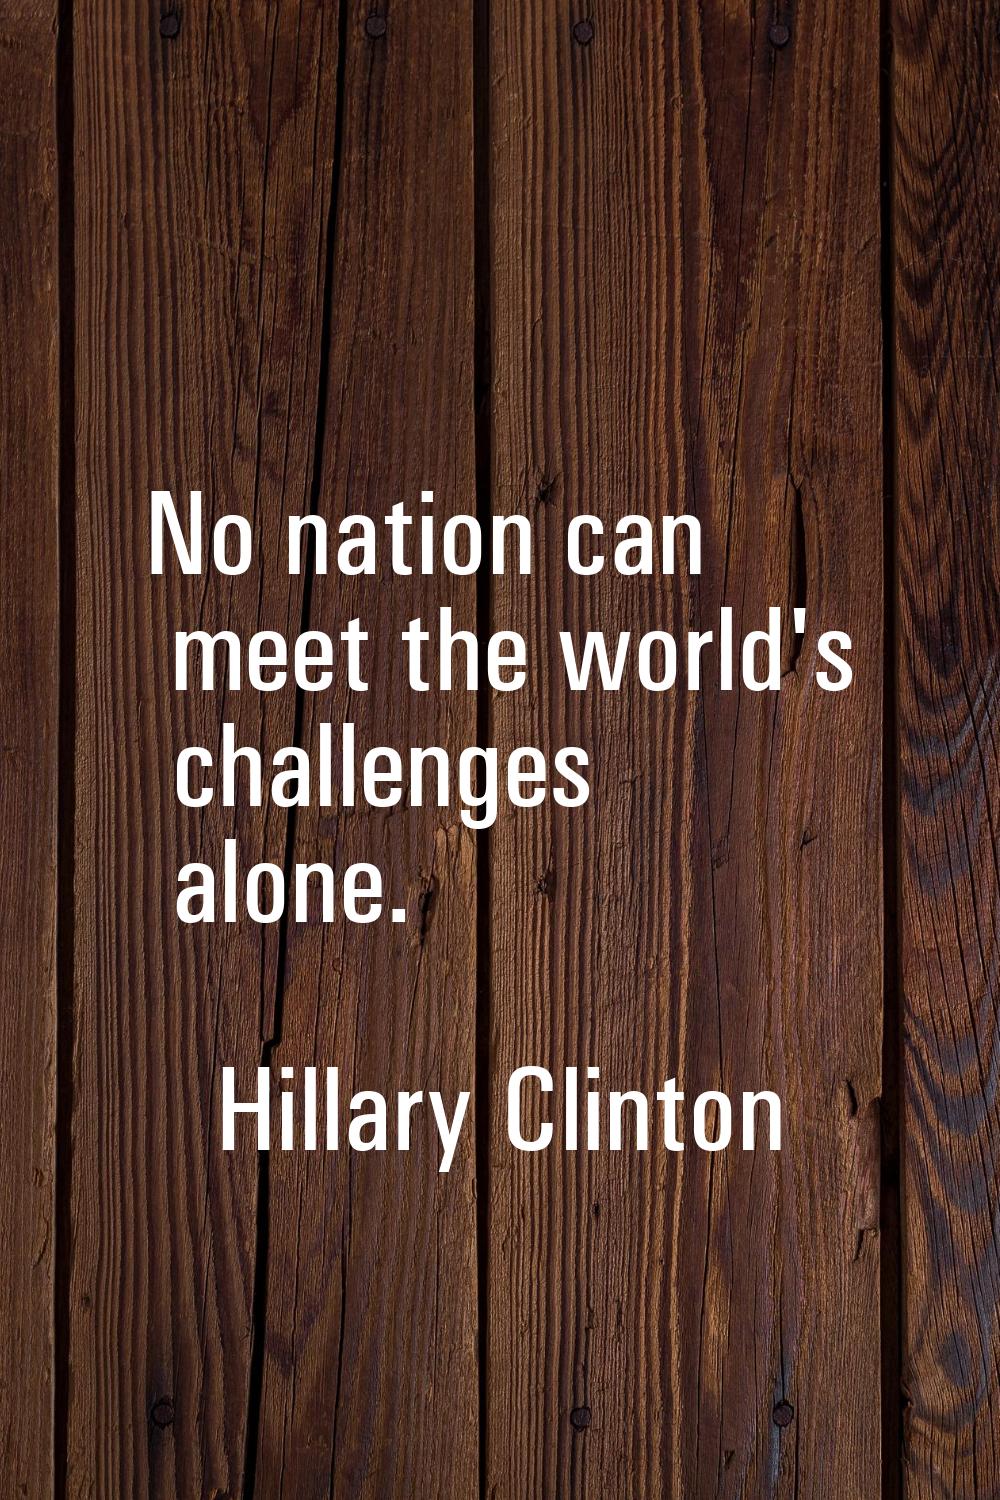 No nation can meet the world's challenges alone.